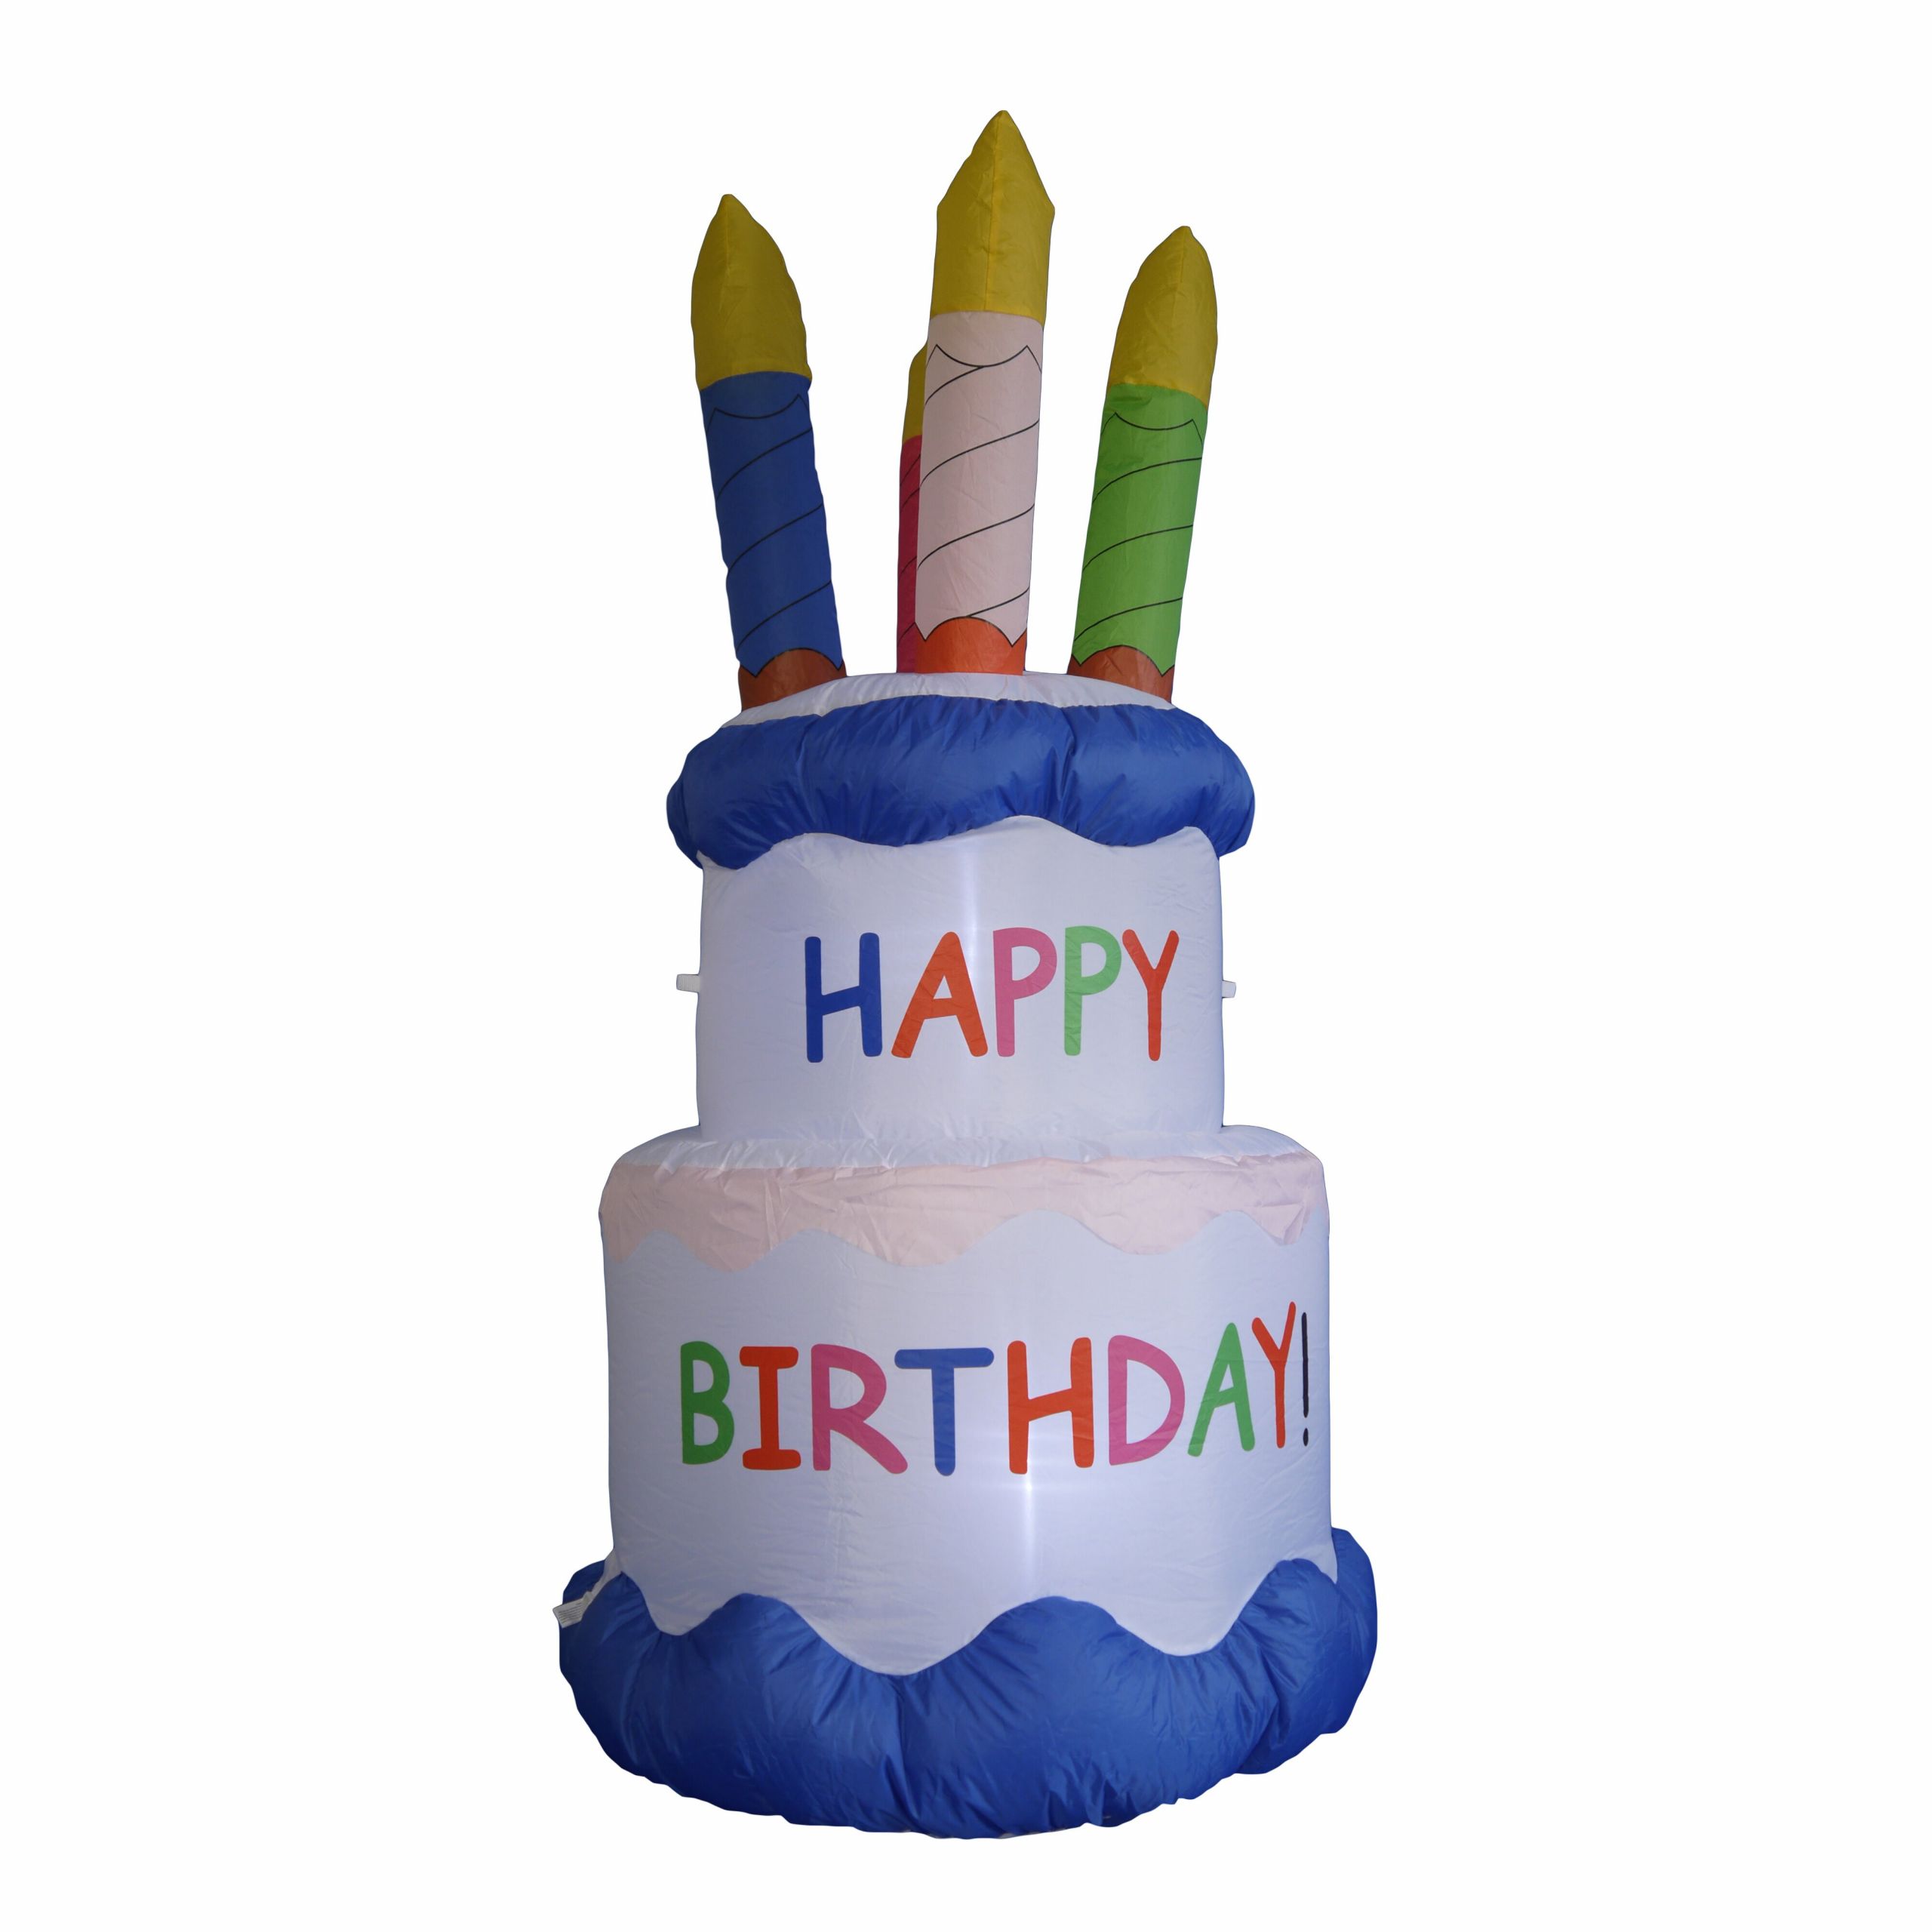 Inflatable Birthday Cake
 BZB Goods Inflatable Cake with Candles Happy Birthday